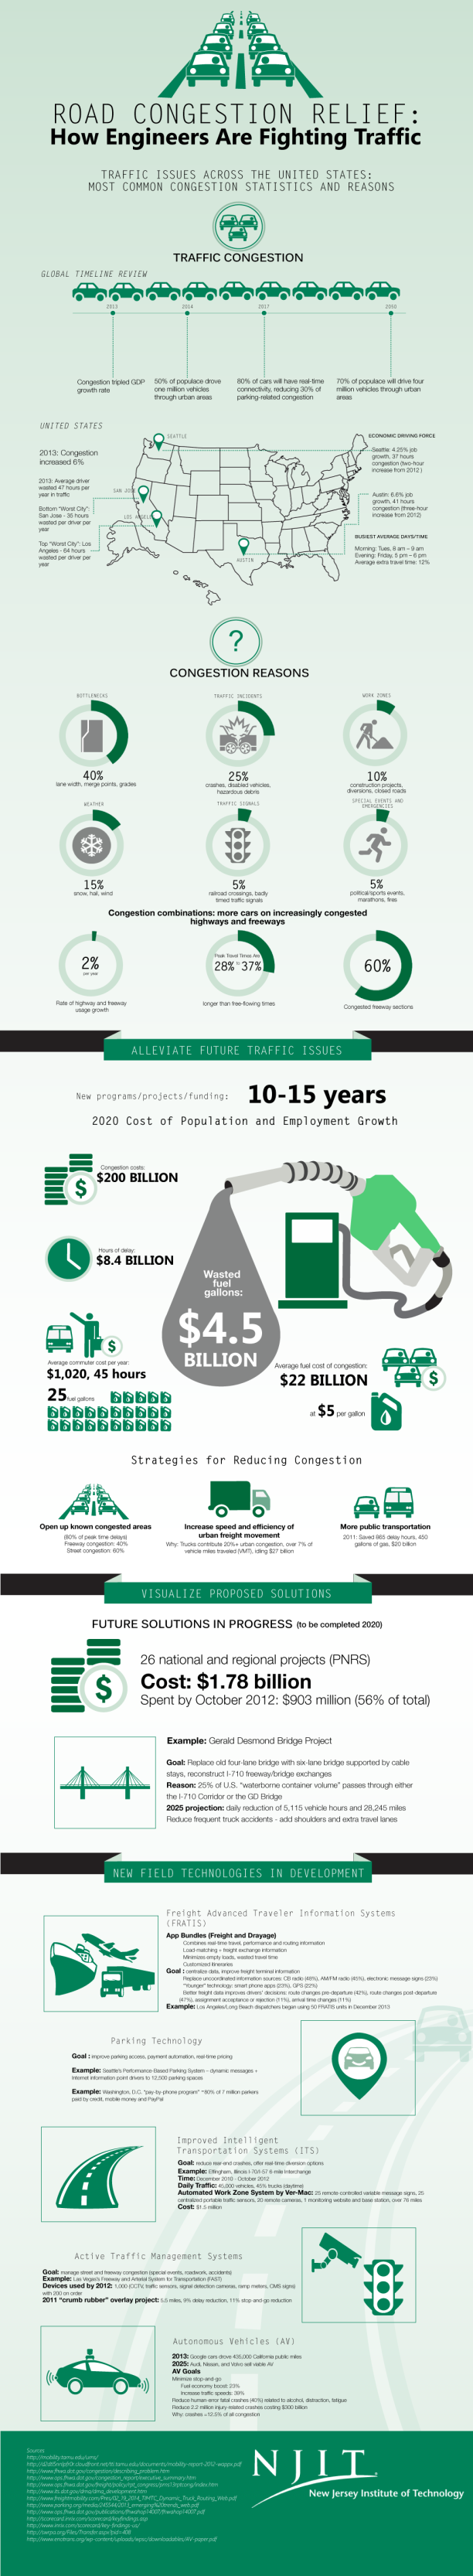 Road-Congestion-Relief-Infographic_final